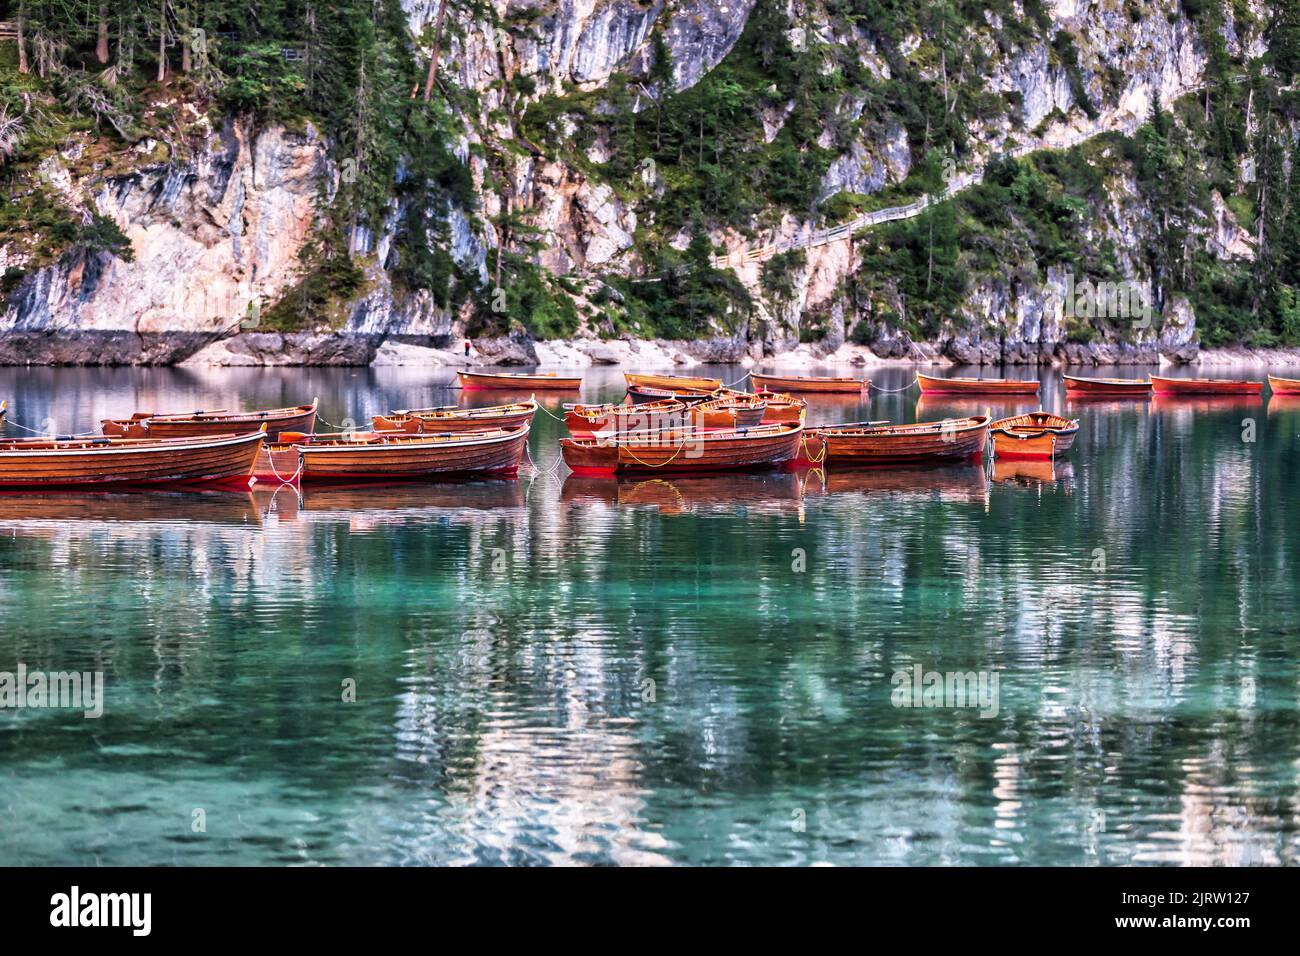 quaint and picturesque wooden boats in a lake in the mountains Stock Photo